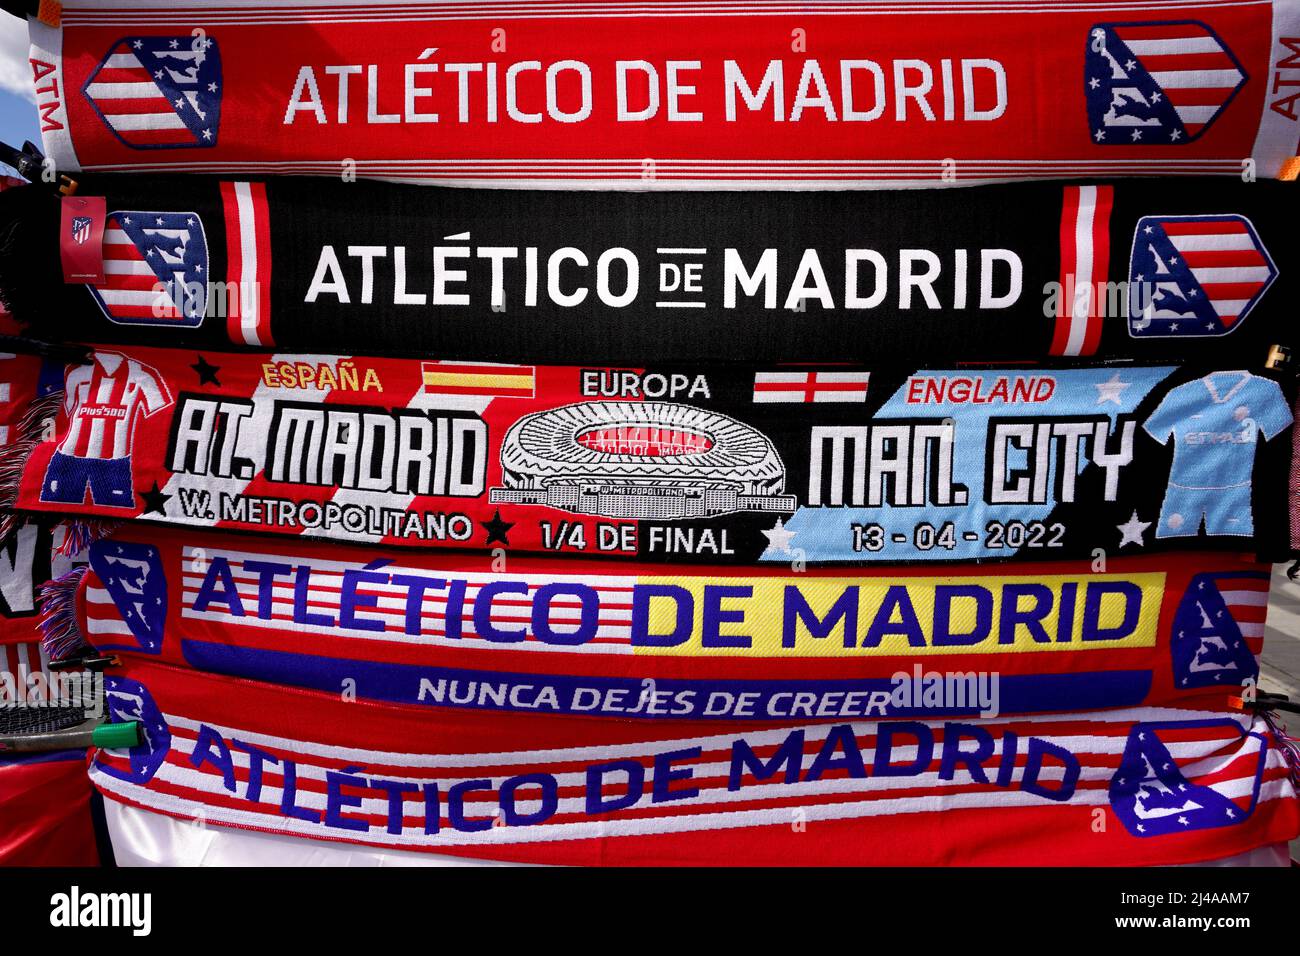 OFFICIAL HIGH QUALITY SCARF CHAMPIONS LEAGUE 12/13 SL BENFICA x SPARTAK  MOSCOW